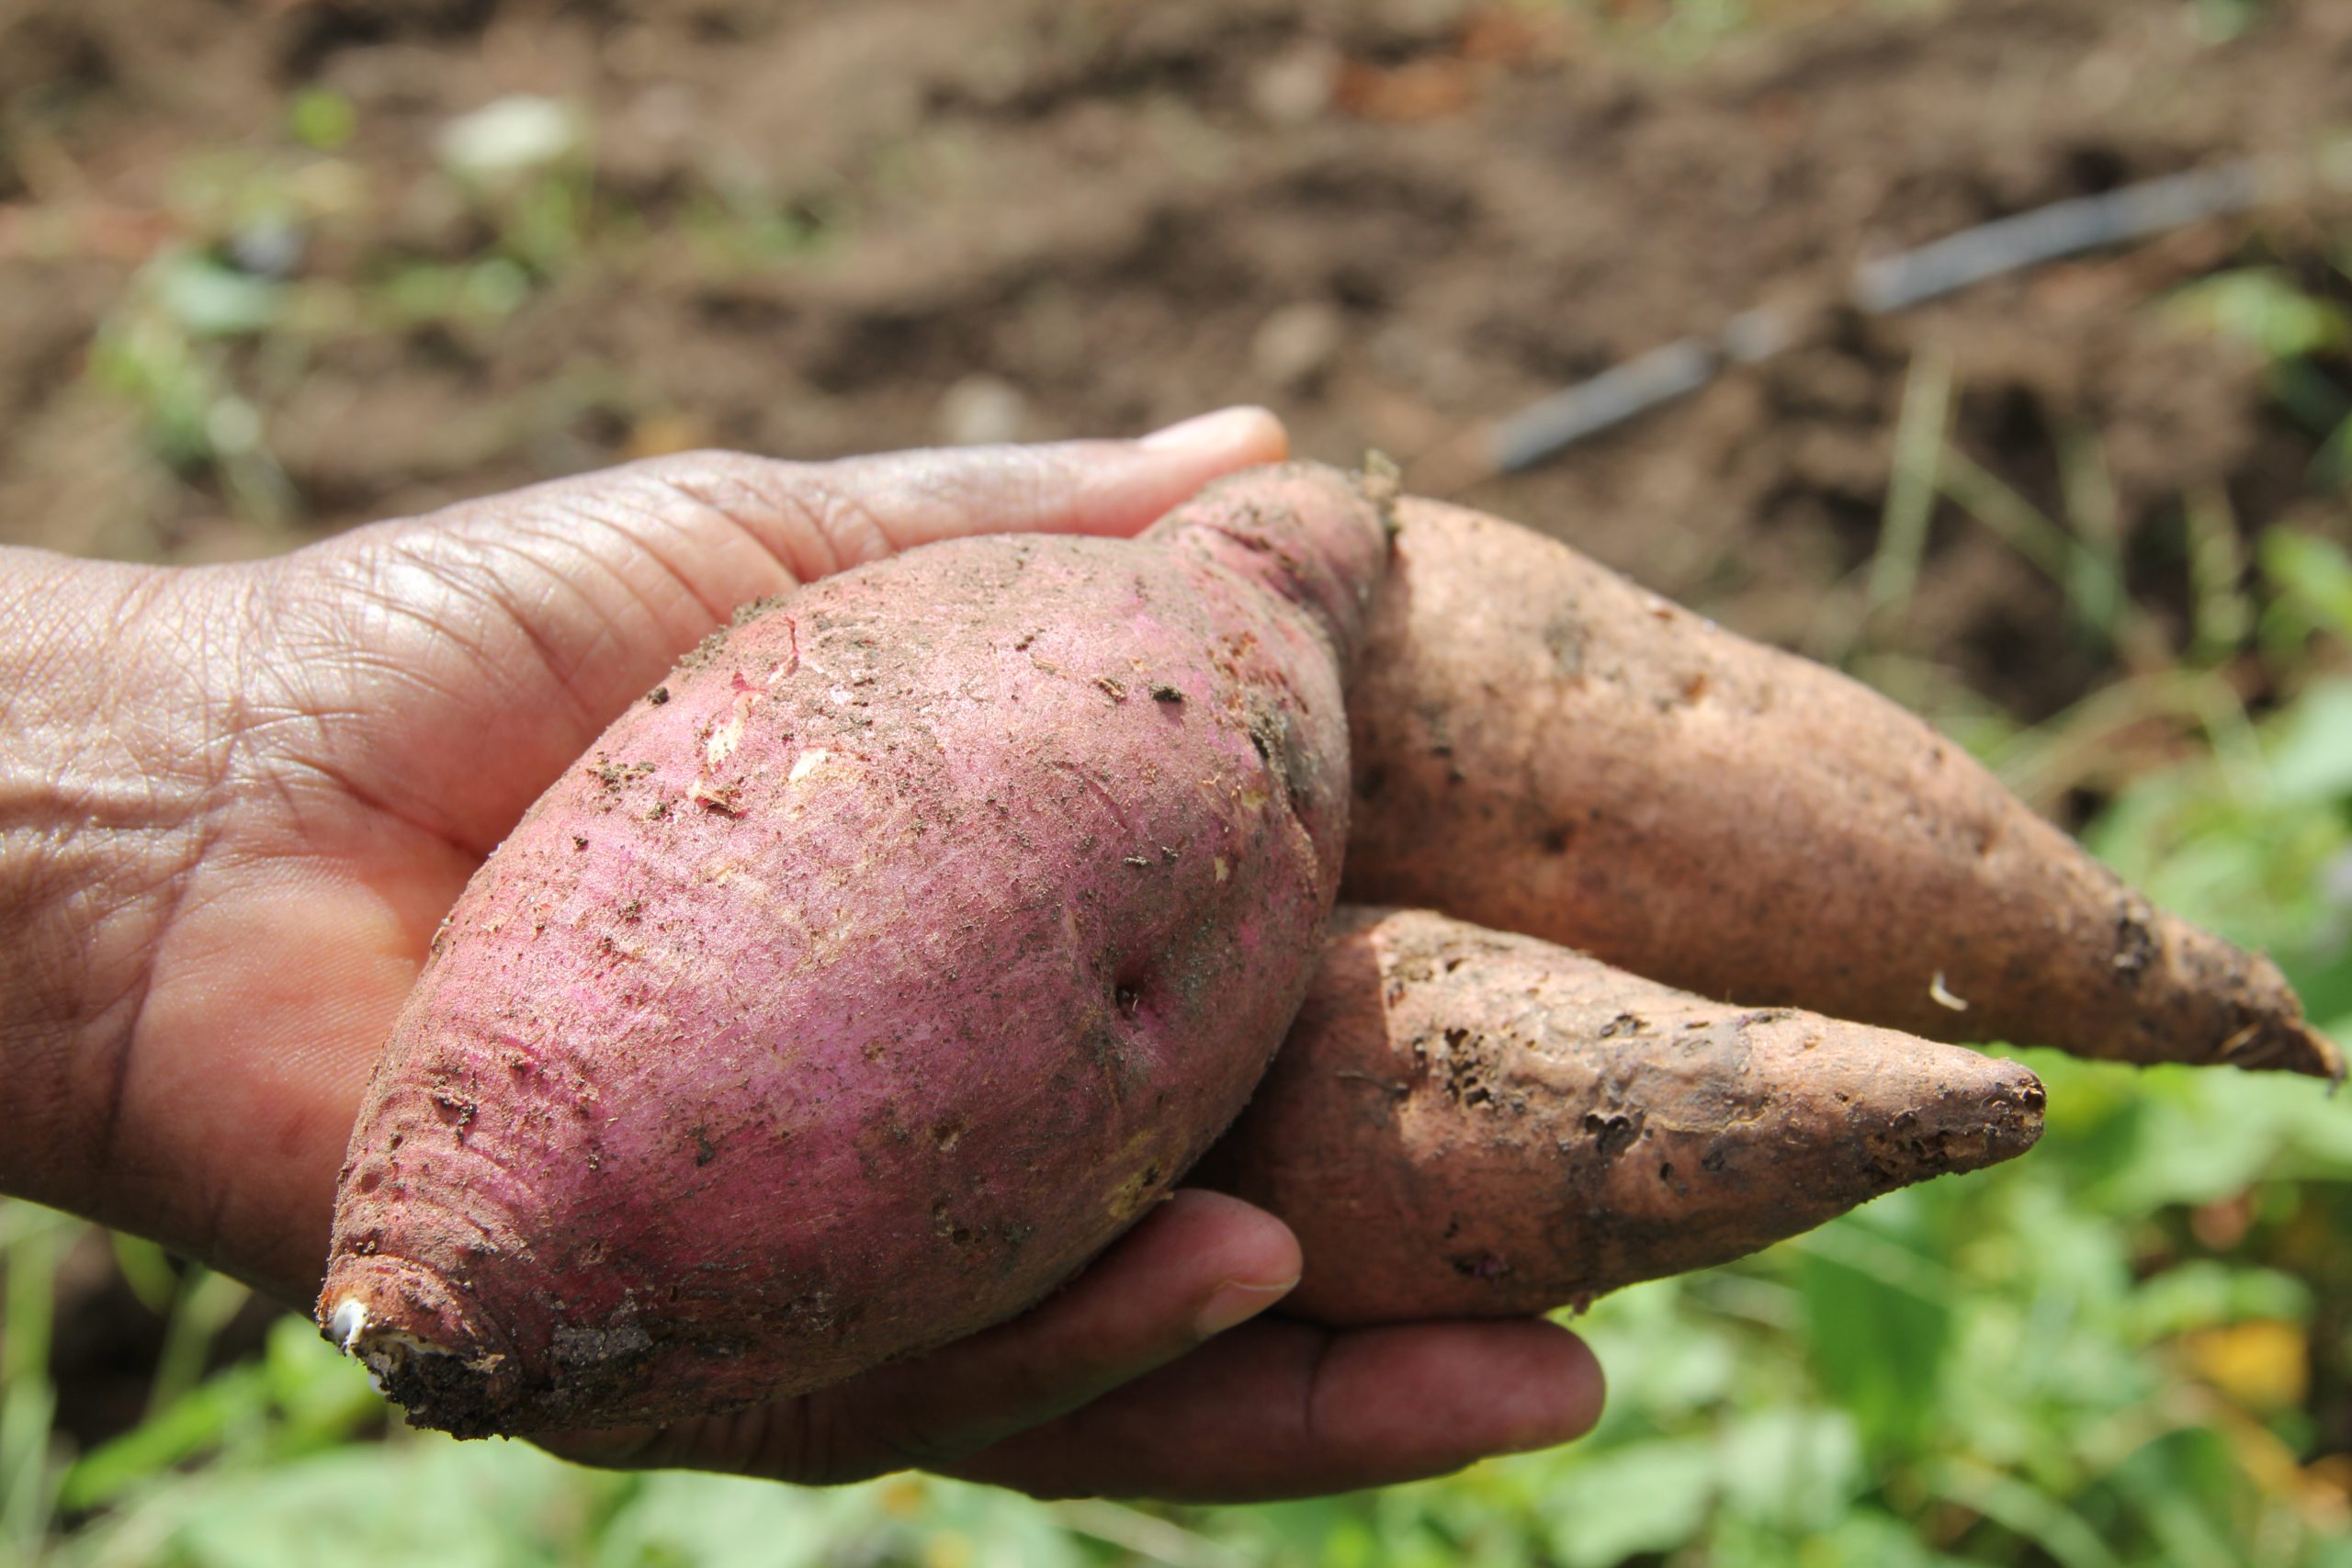 Sweet potatoes cultivated on Nevis